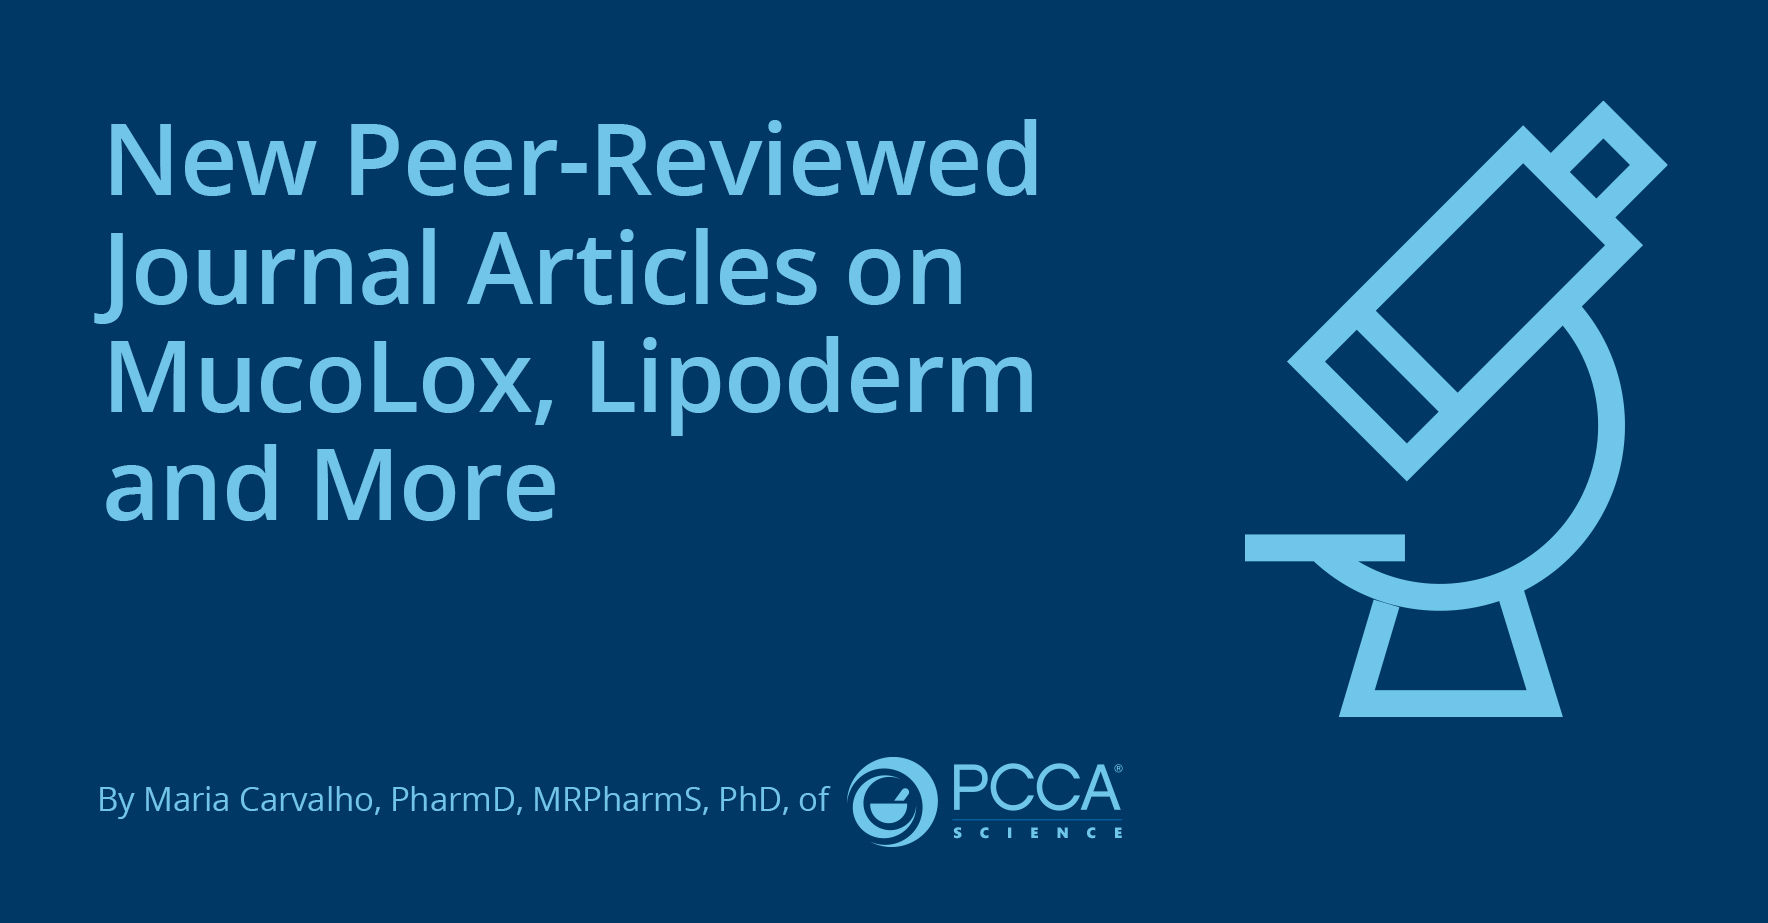 New_Peer-Reviewed_Journal_Articles_on_MucoLox_Lipoderm_and_More.jpg